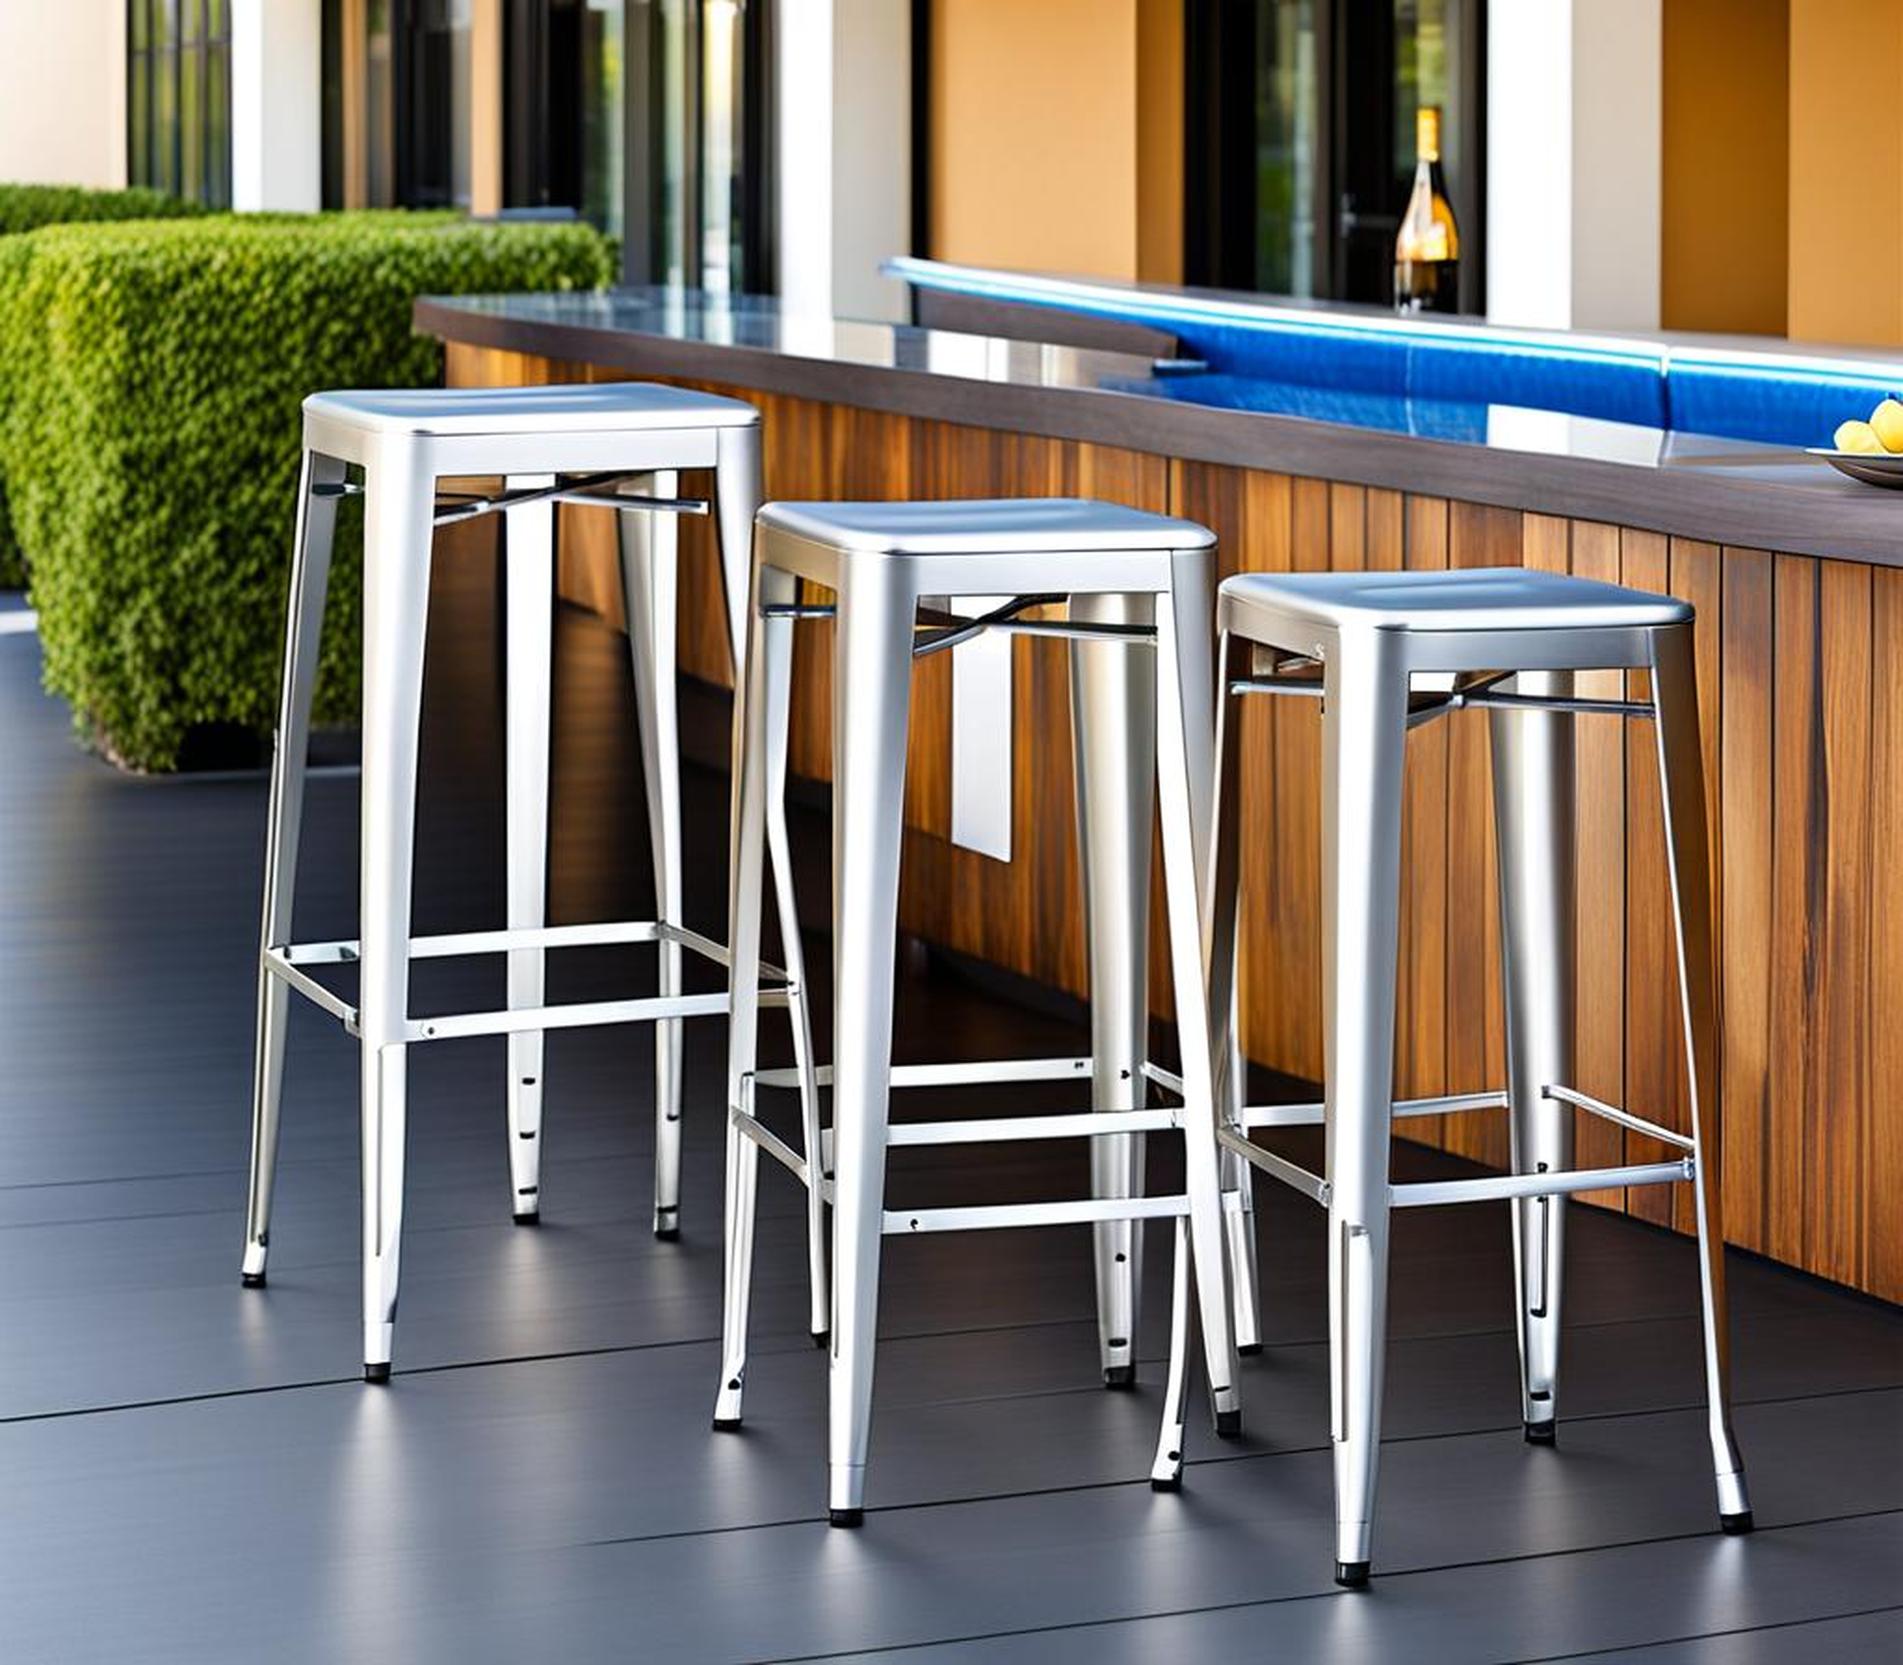 Relax Outdoors Year-Round with Durable Aluminum Bar Stools